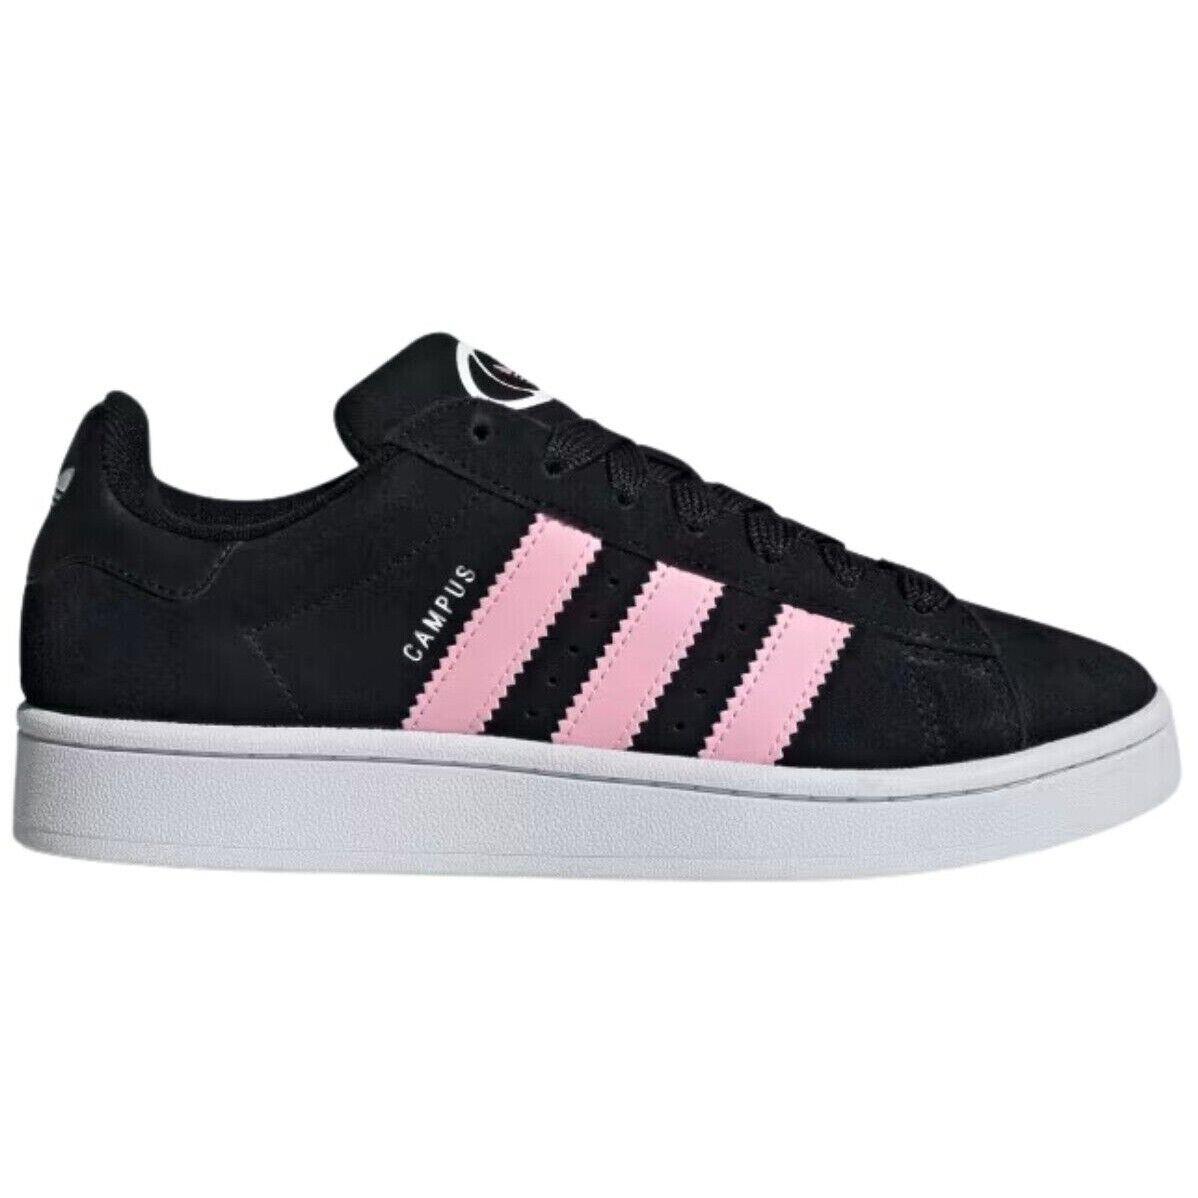 Adidas Originals Campus 00S Women`s Casual Shoes All Colors US Szs 5-11 Core Black / Footwear White / True Pink